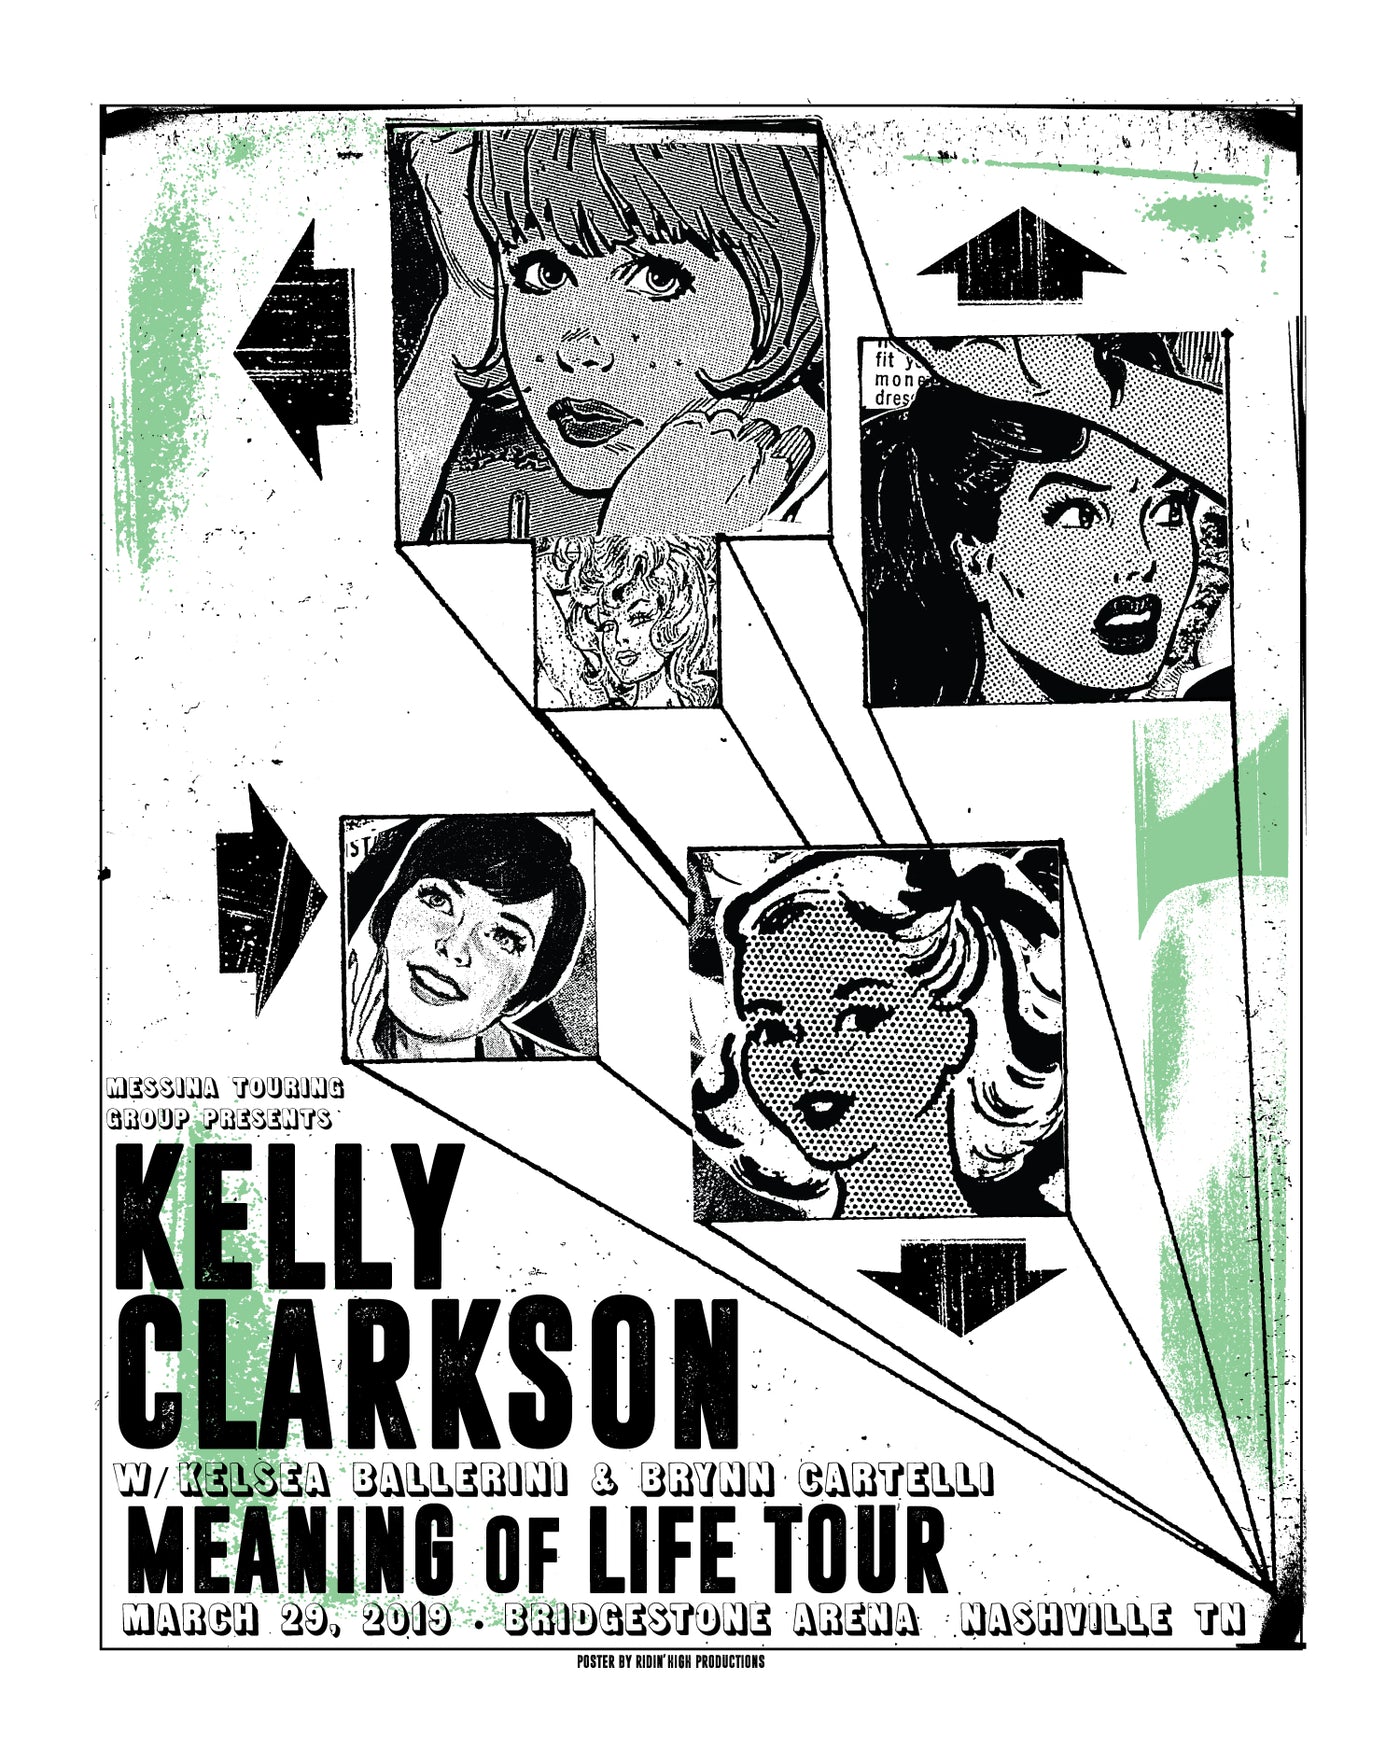 KELLY CLARKSON POSTER